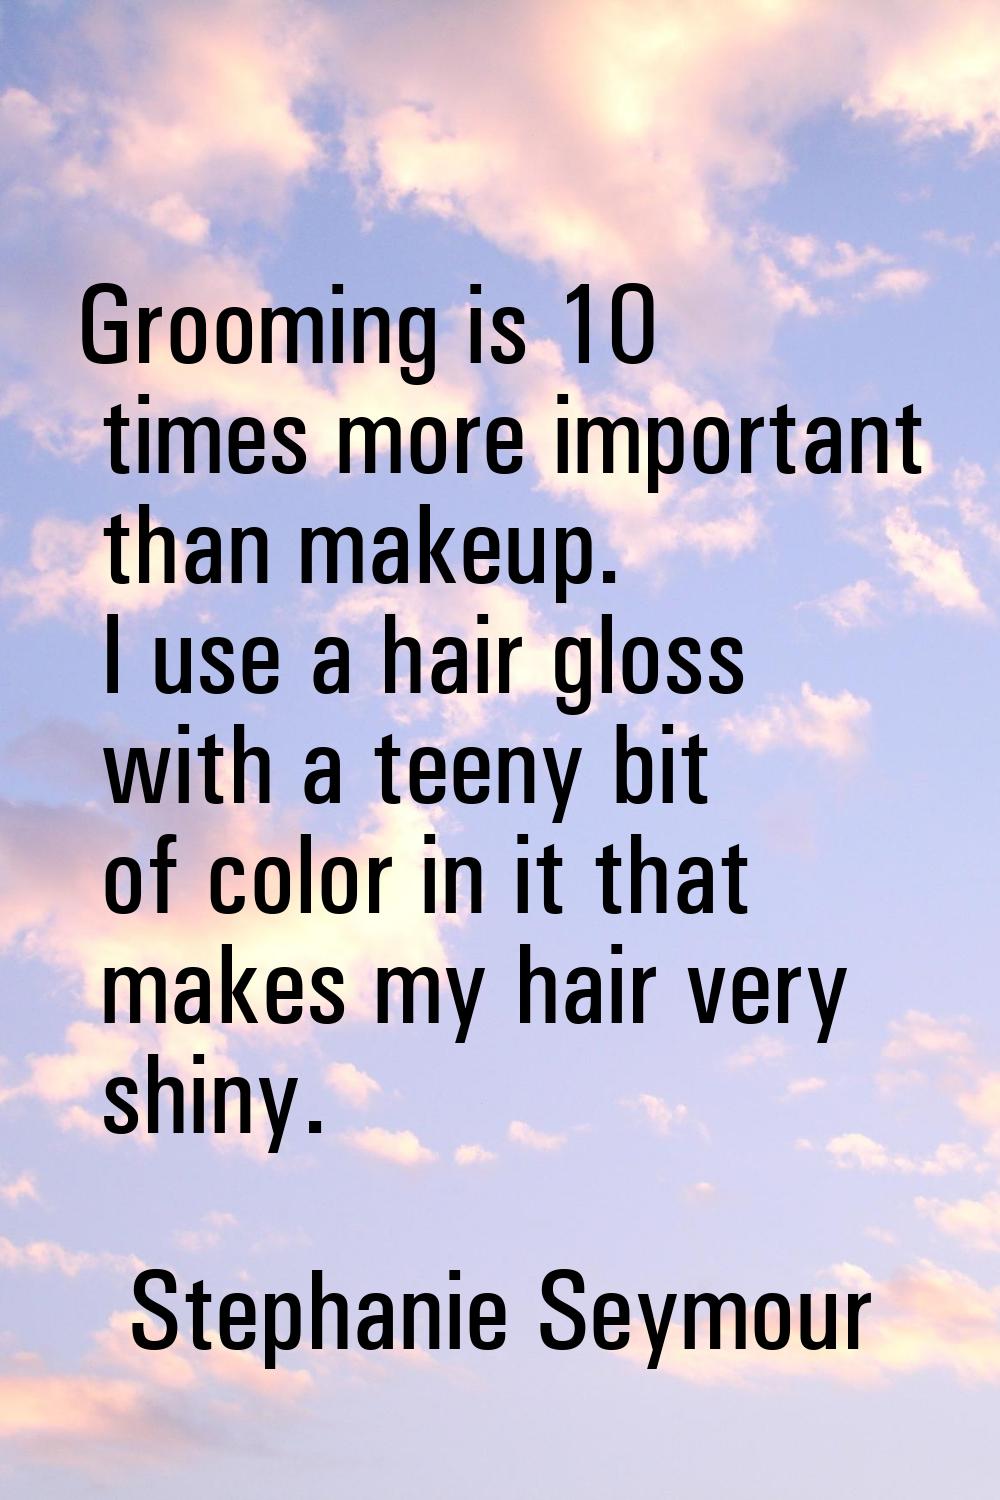 Grooming is 10 times more important than makeup. I use a hair gloss with a teeny bit of color in it